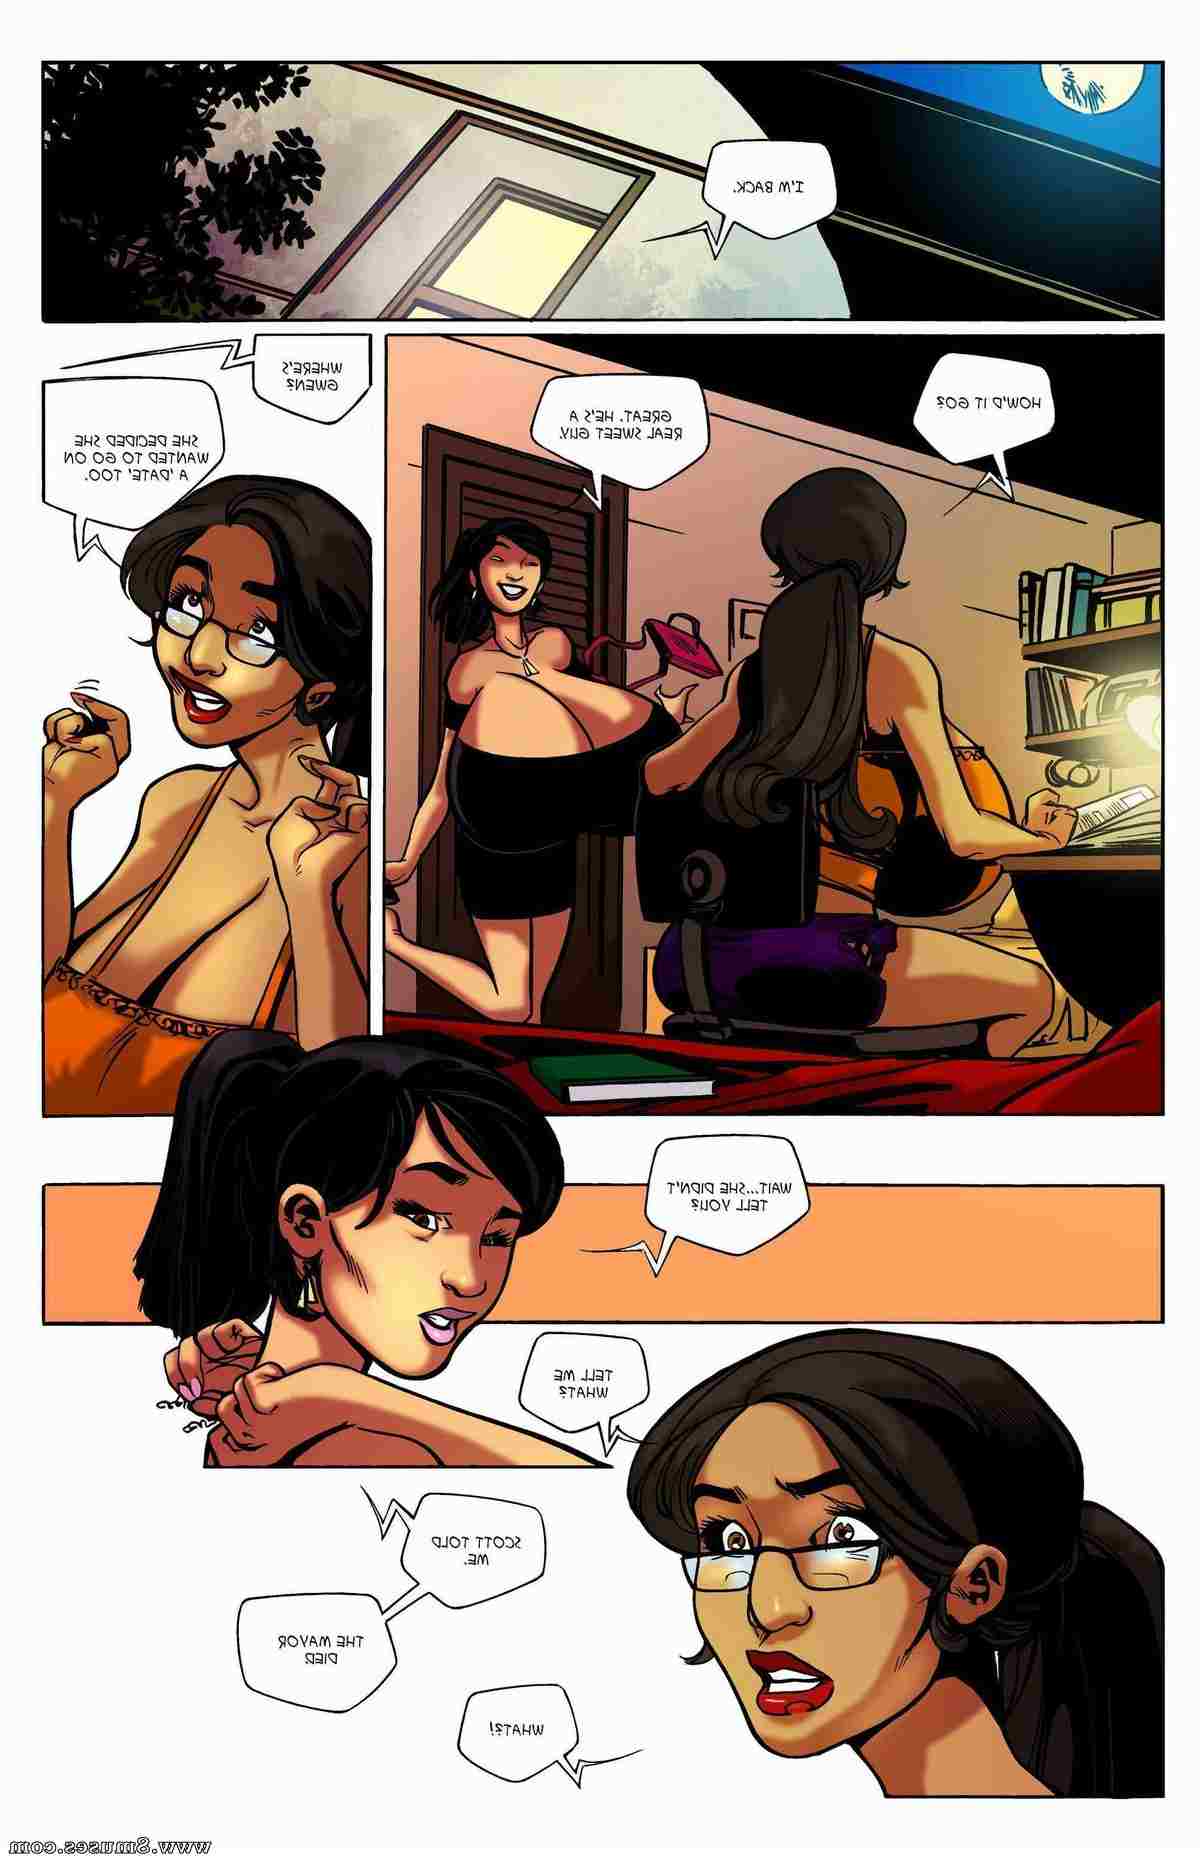 BE-Story-Club-Comics/Welcome-to-Chastity Welcome_to_Chastity__8muses_-_Sex_and_Porn_Comics_83.jpg